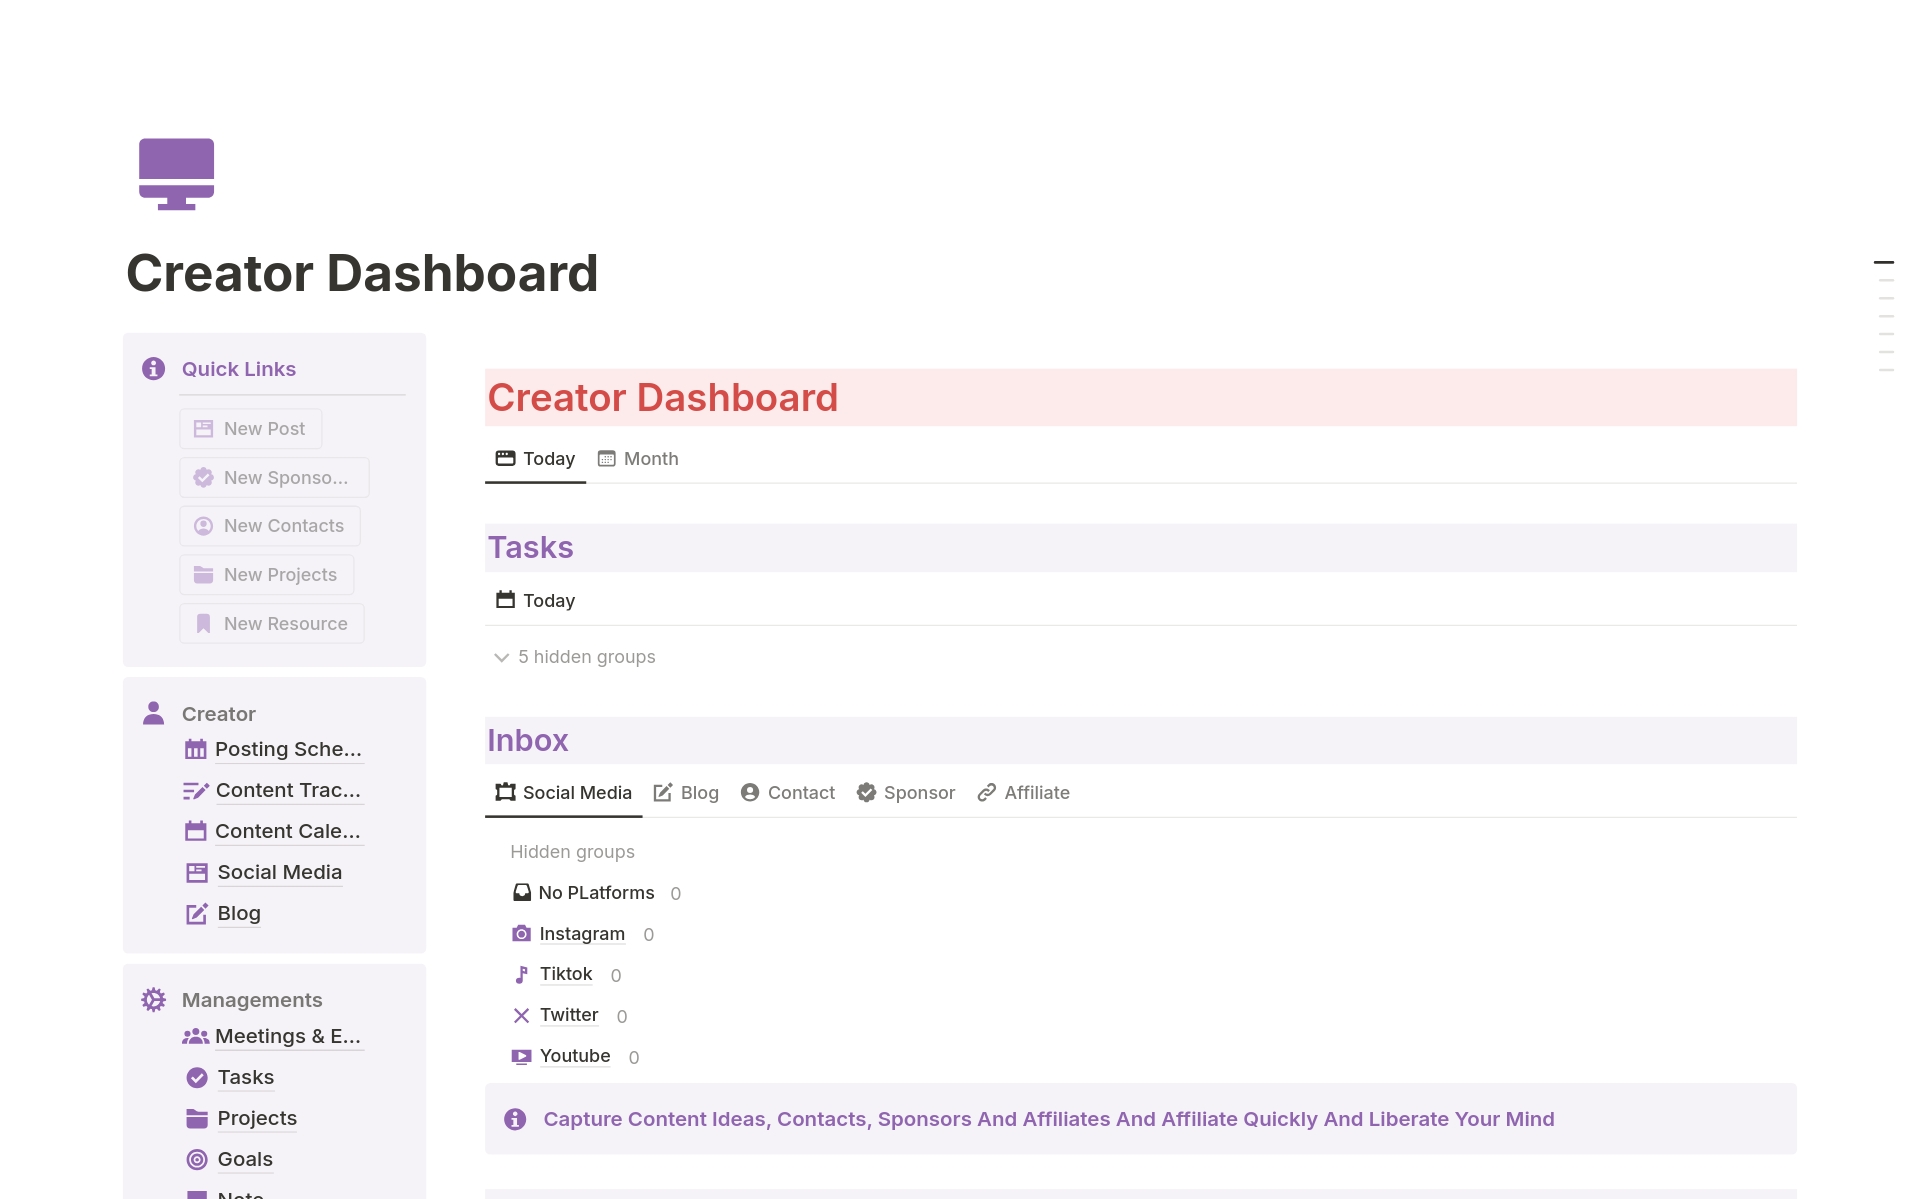 The "Notion Creator Dashboard" is your all-in-one tool for managing projects, tracking goals, handling finances, and optimizing content creation. Streamline your workflow with automated databases and advanced workflows. Perfect for creators looking to maximize efficiency 